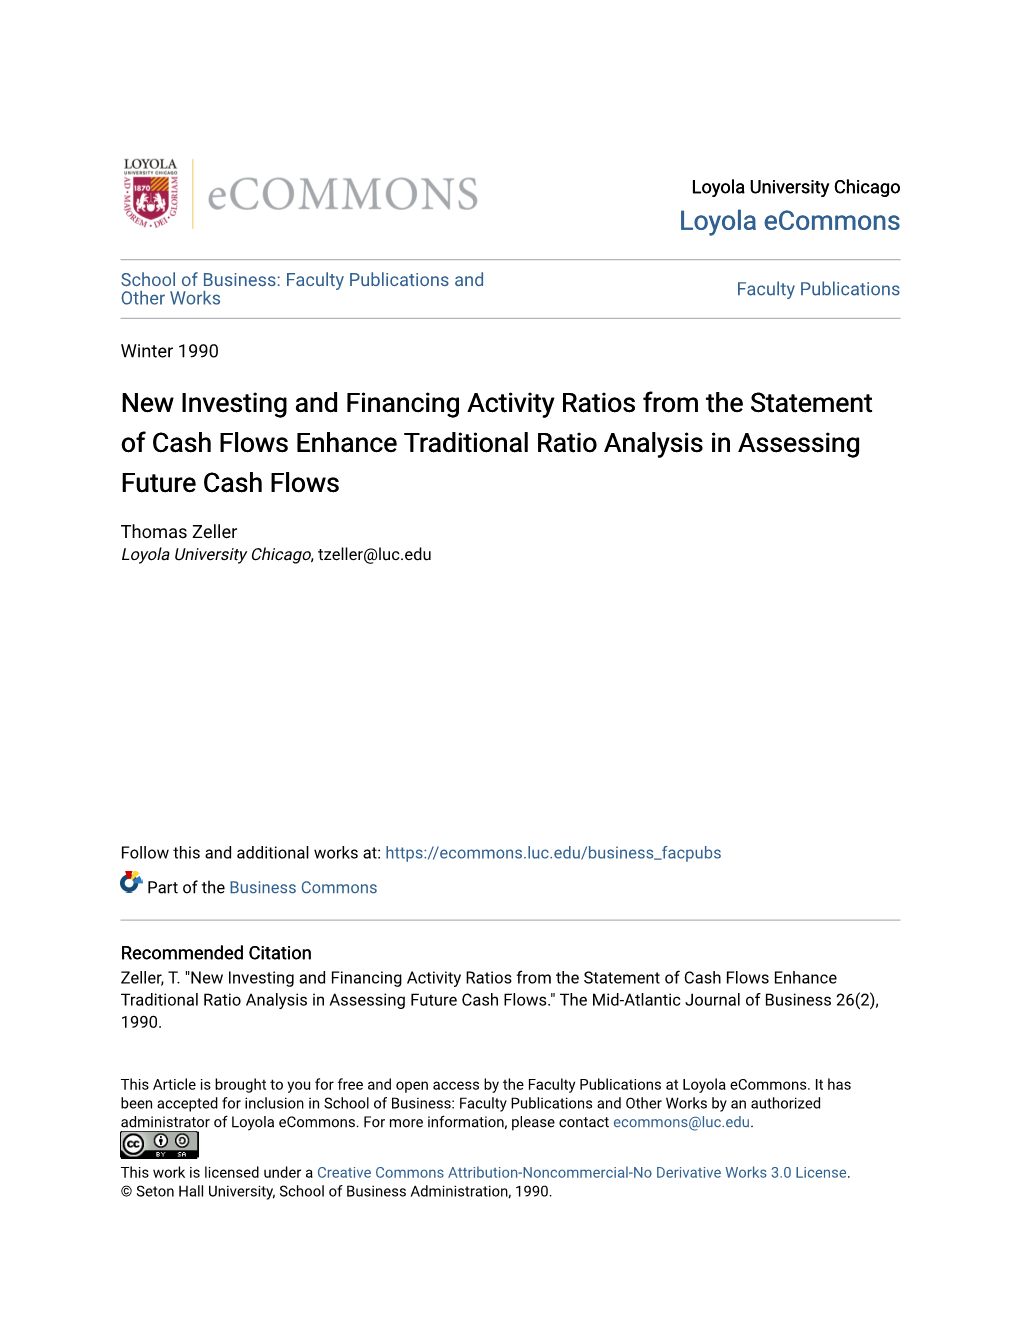 New Investing and Financing Activity Ratios from the Statement of Cash Flows Enhance Traditional Ratio Analysis in Assessing Future Cash Flows